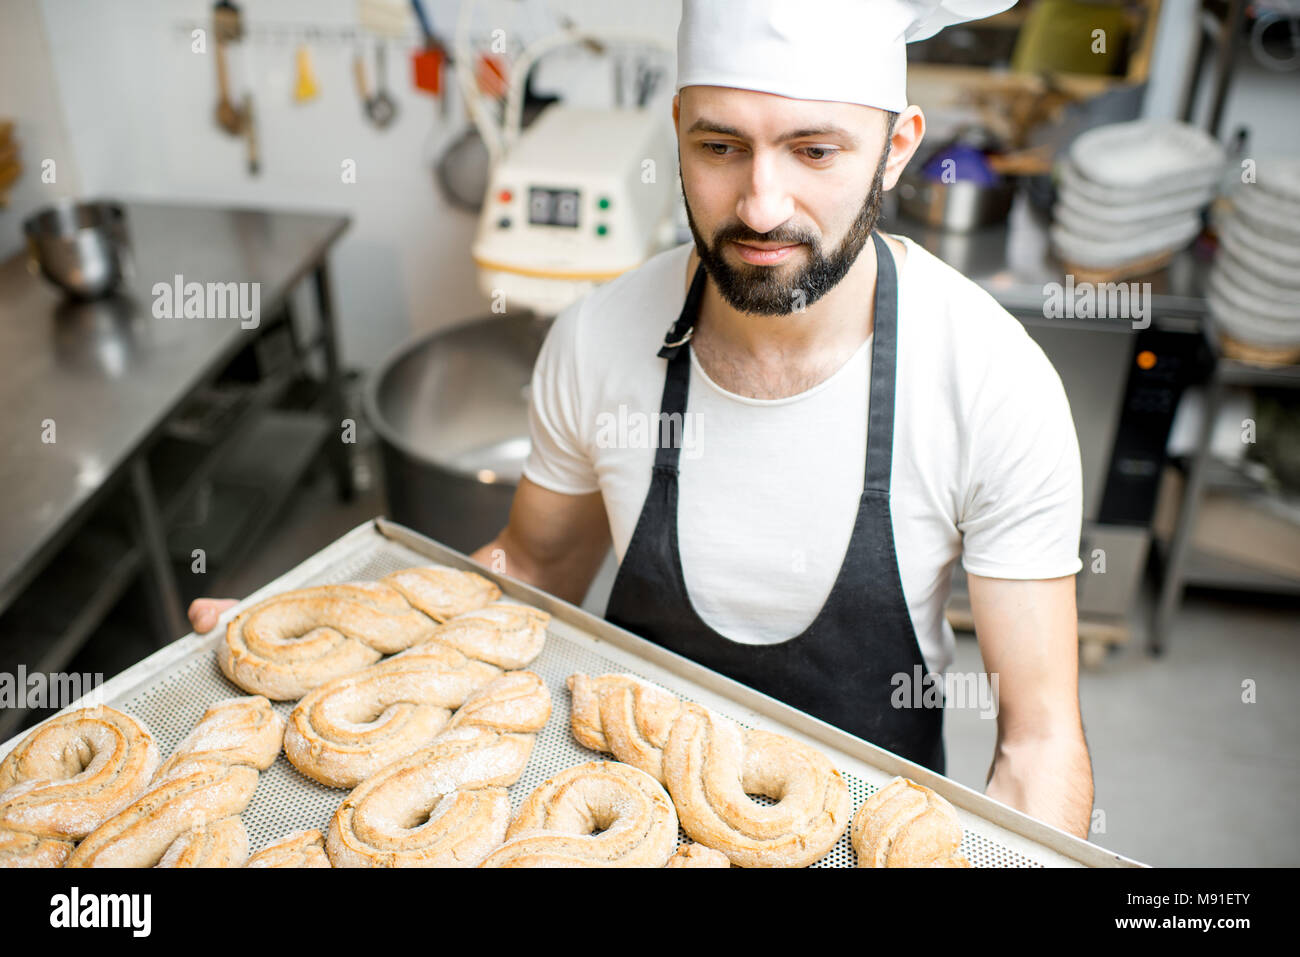 Baker with tray full of sweet pastry Stock Photo